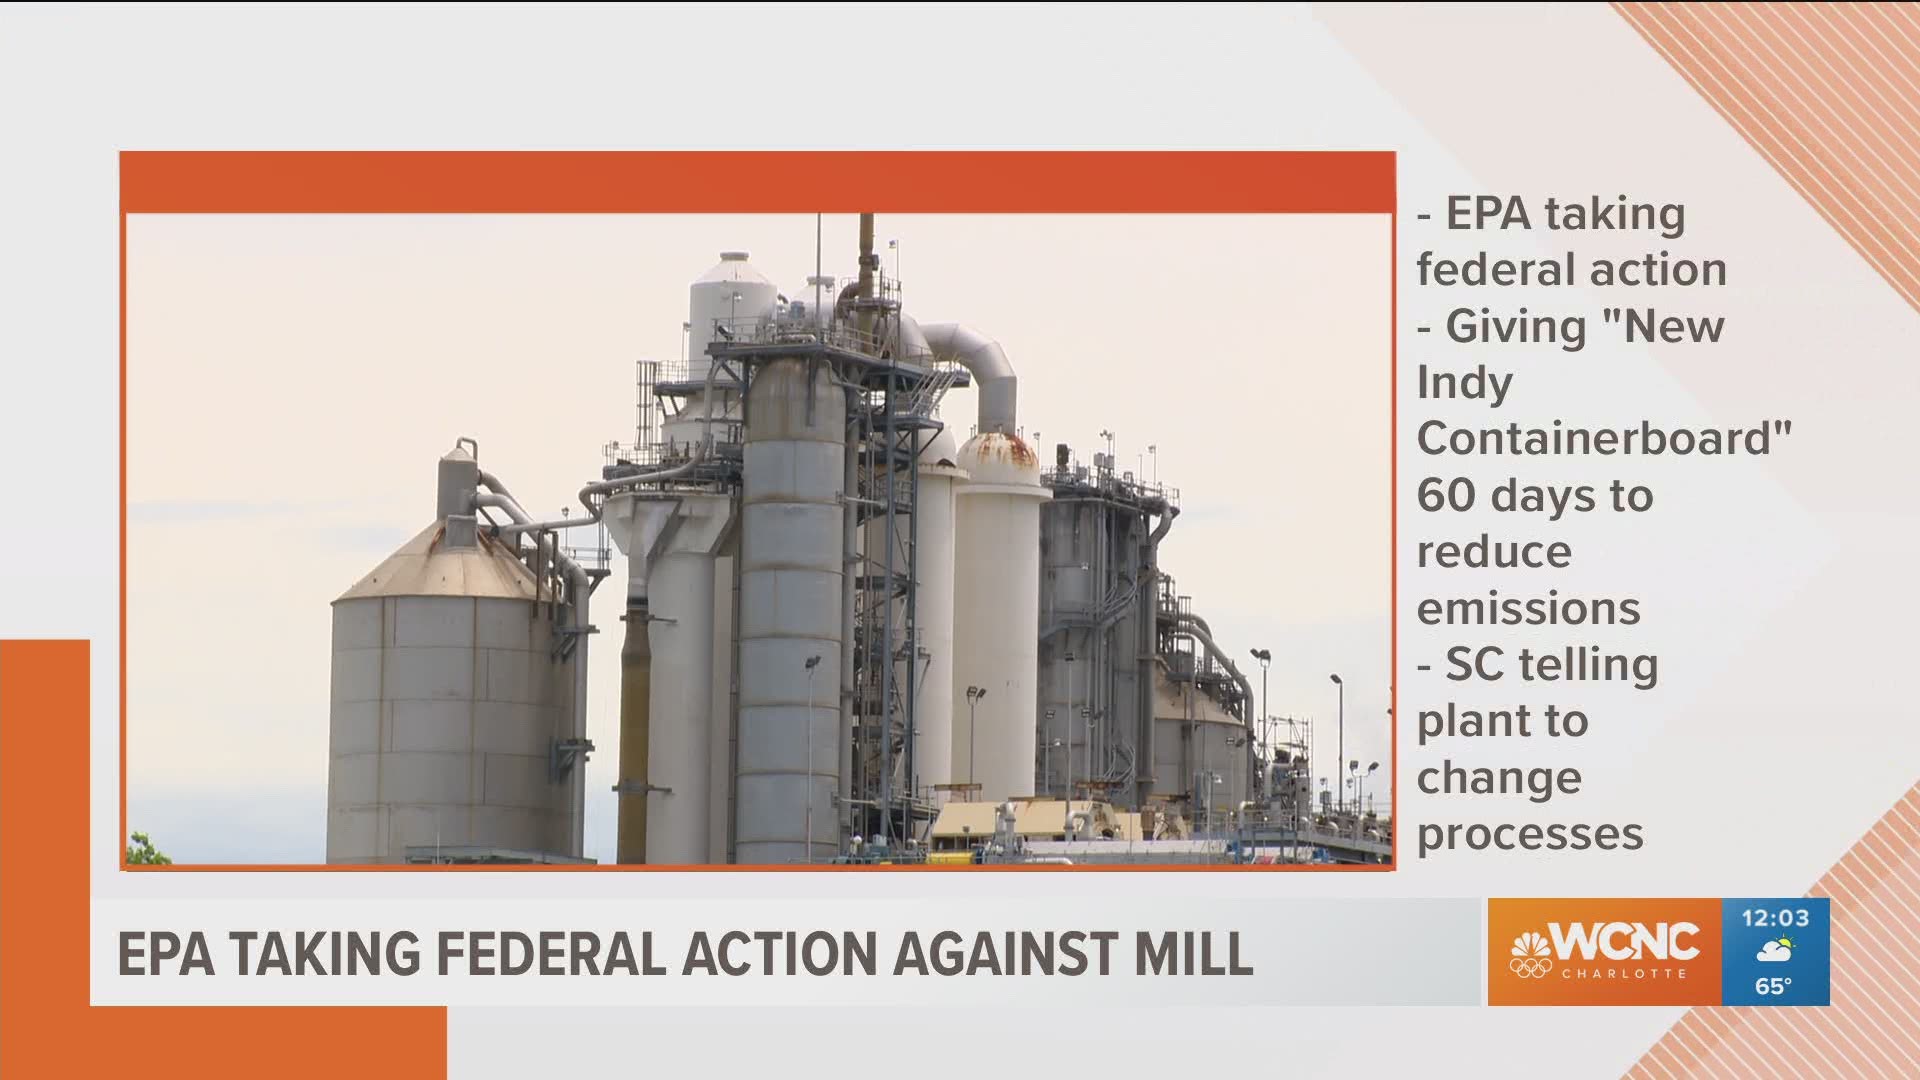 The EPA is giving the New Indy Containerboard paper mill 60 days to reduce emissions before taking further action.